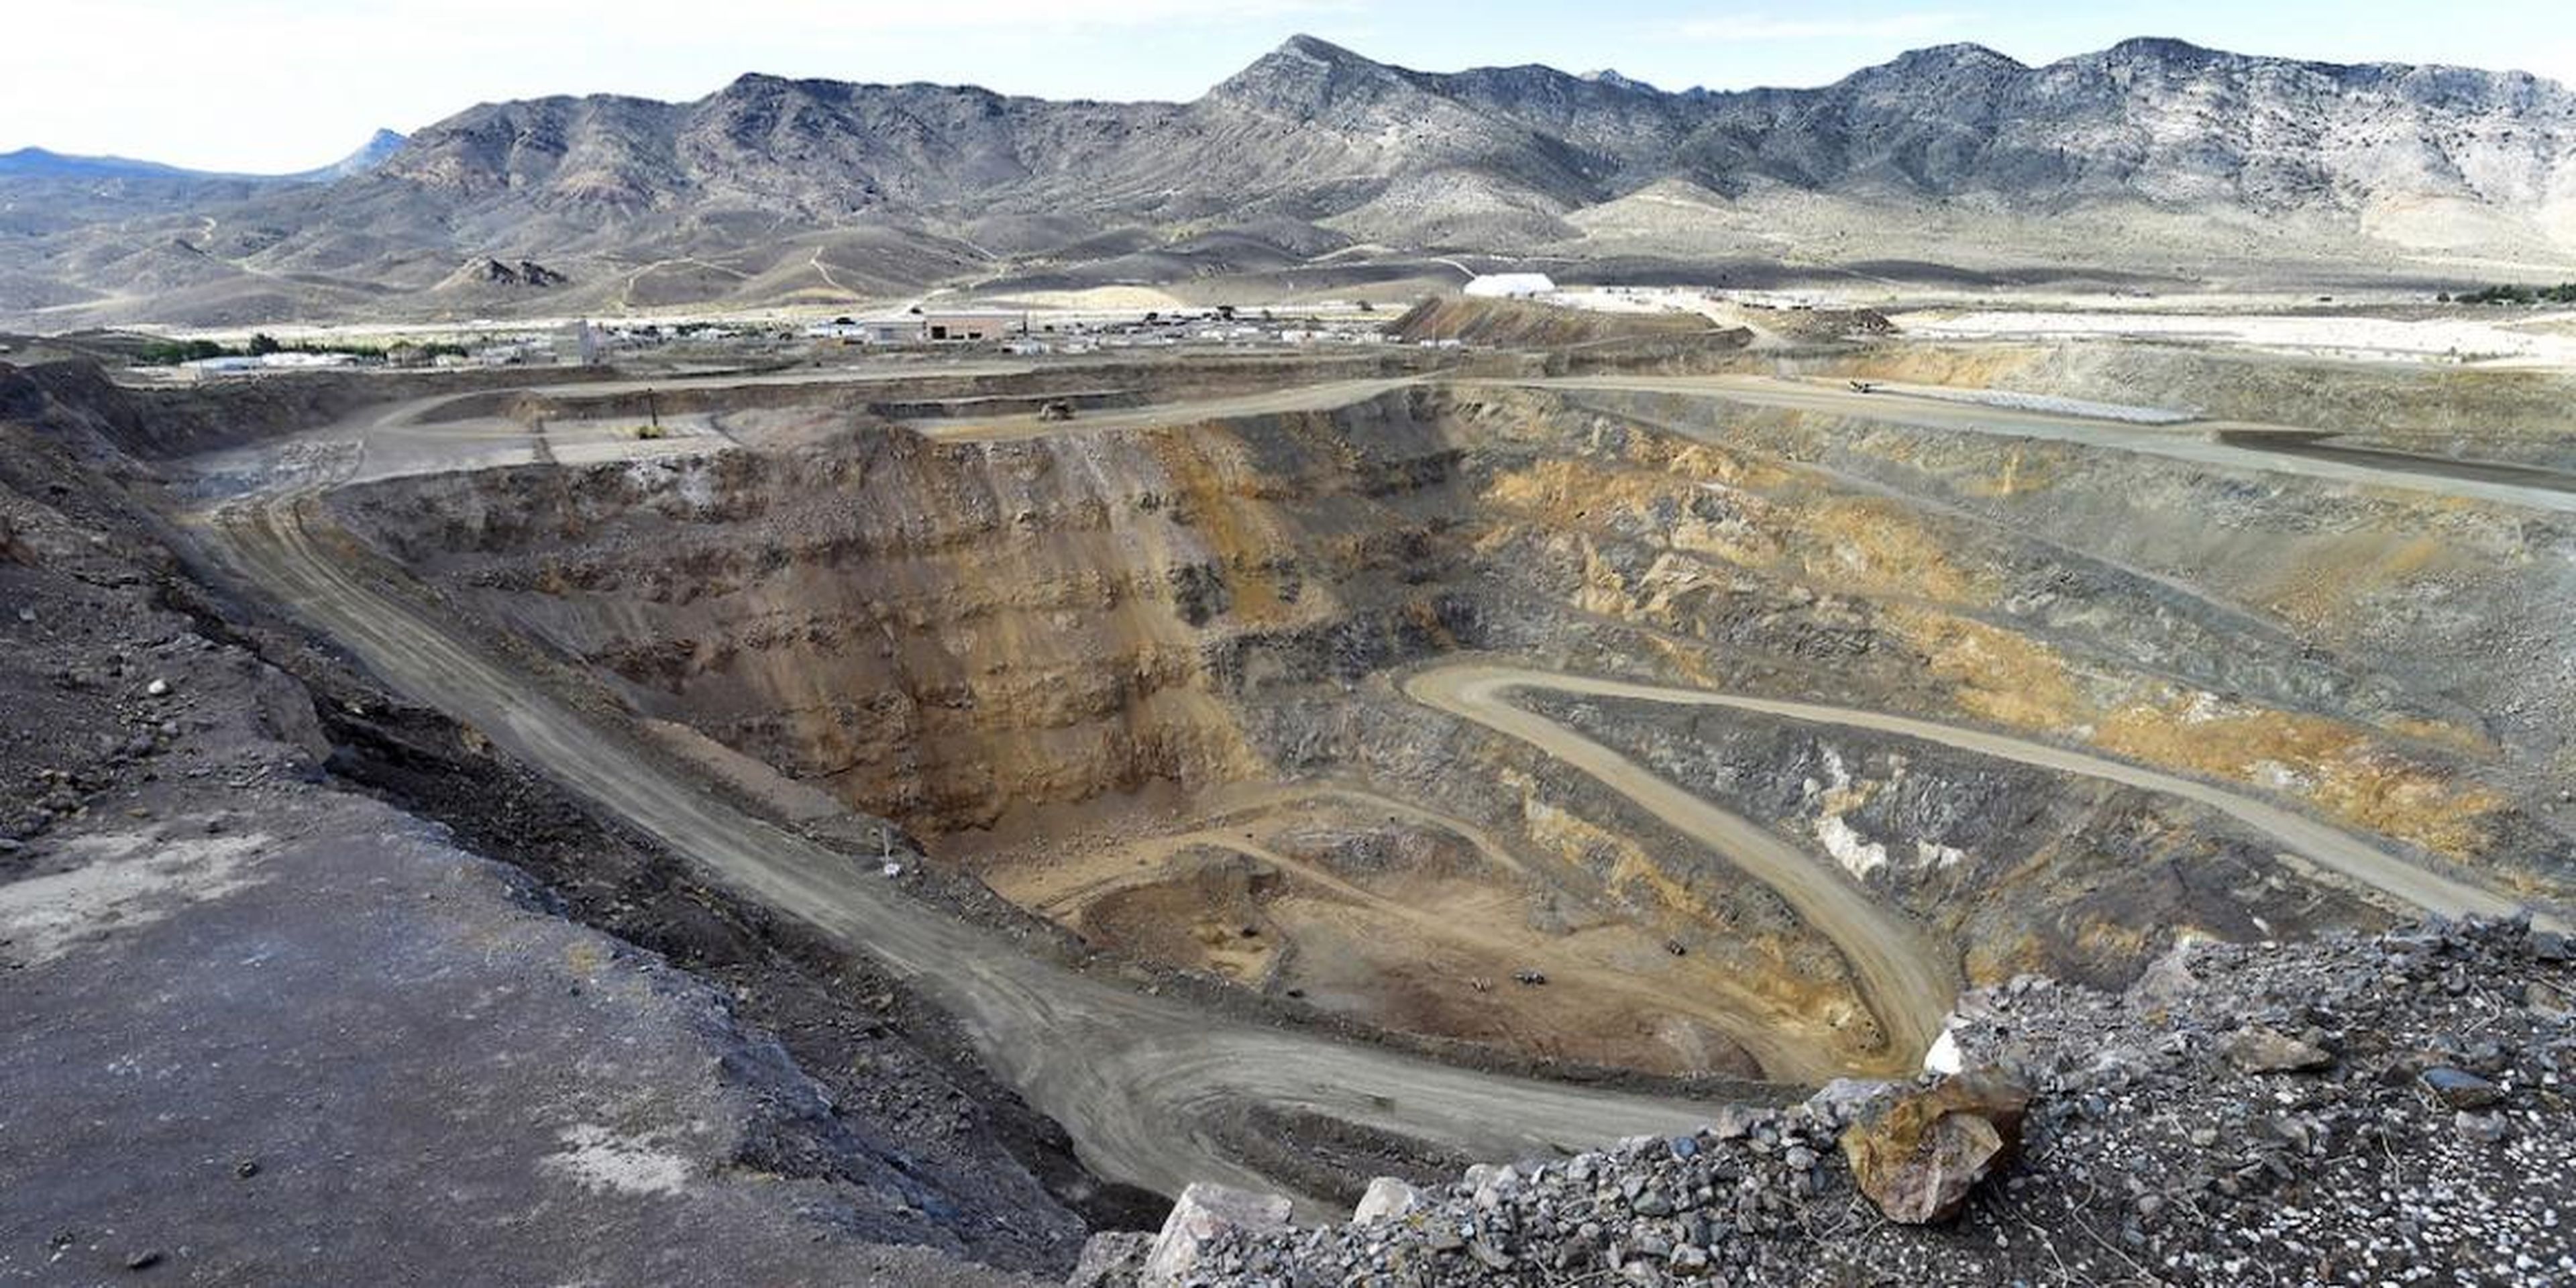 A 500-foot deep open-pit mine at Molycorp's rare-earth facility in Mountain Pass, California, in June 2015.